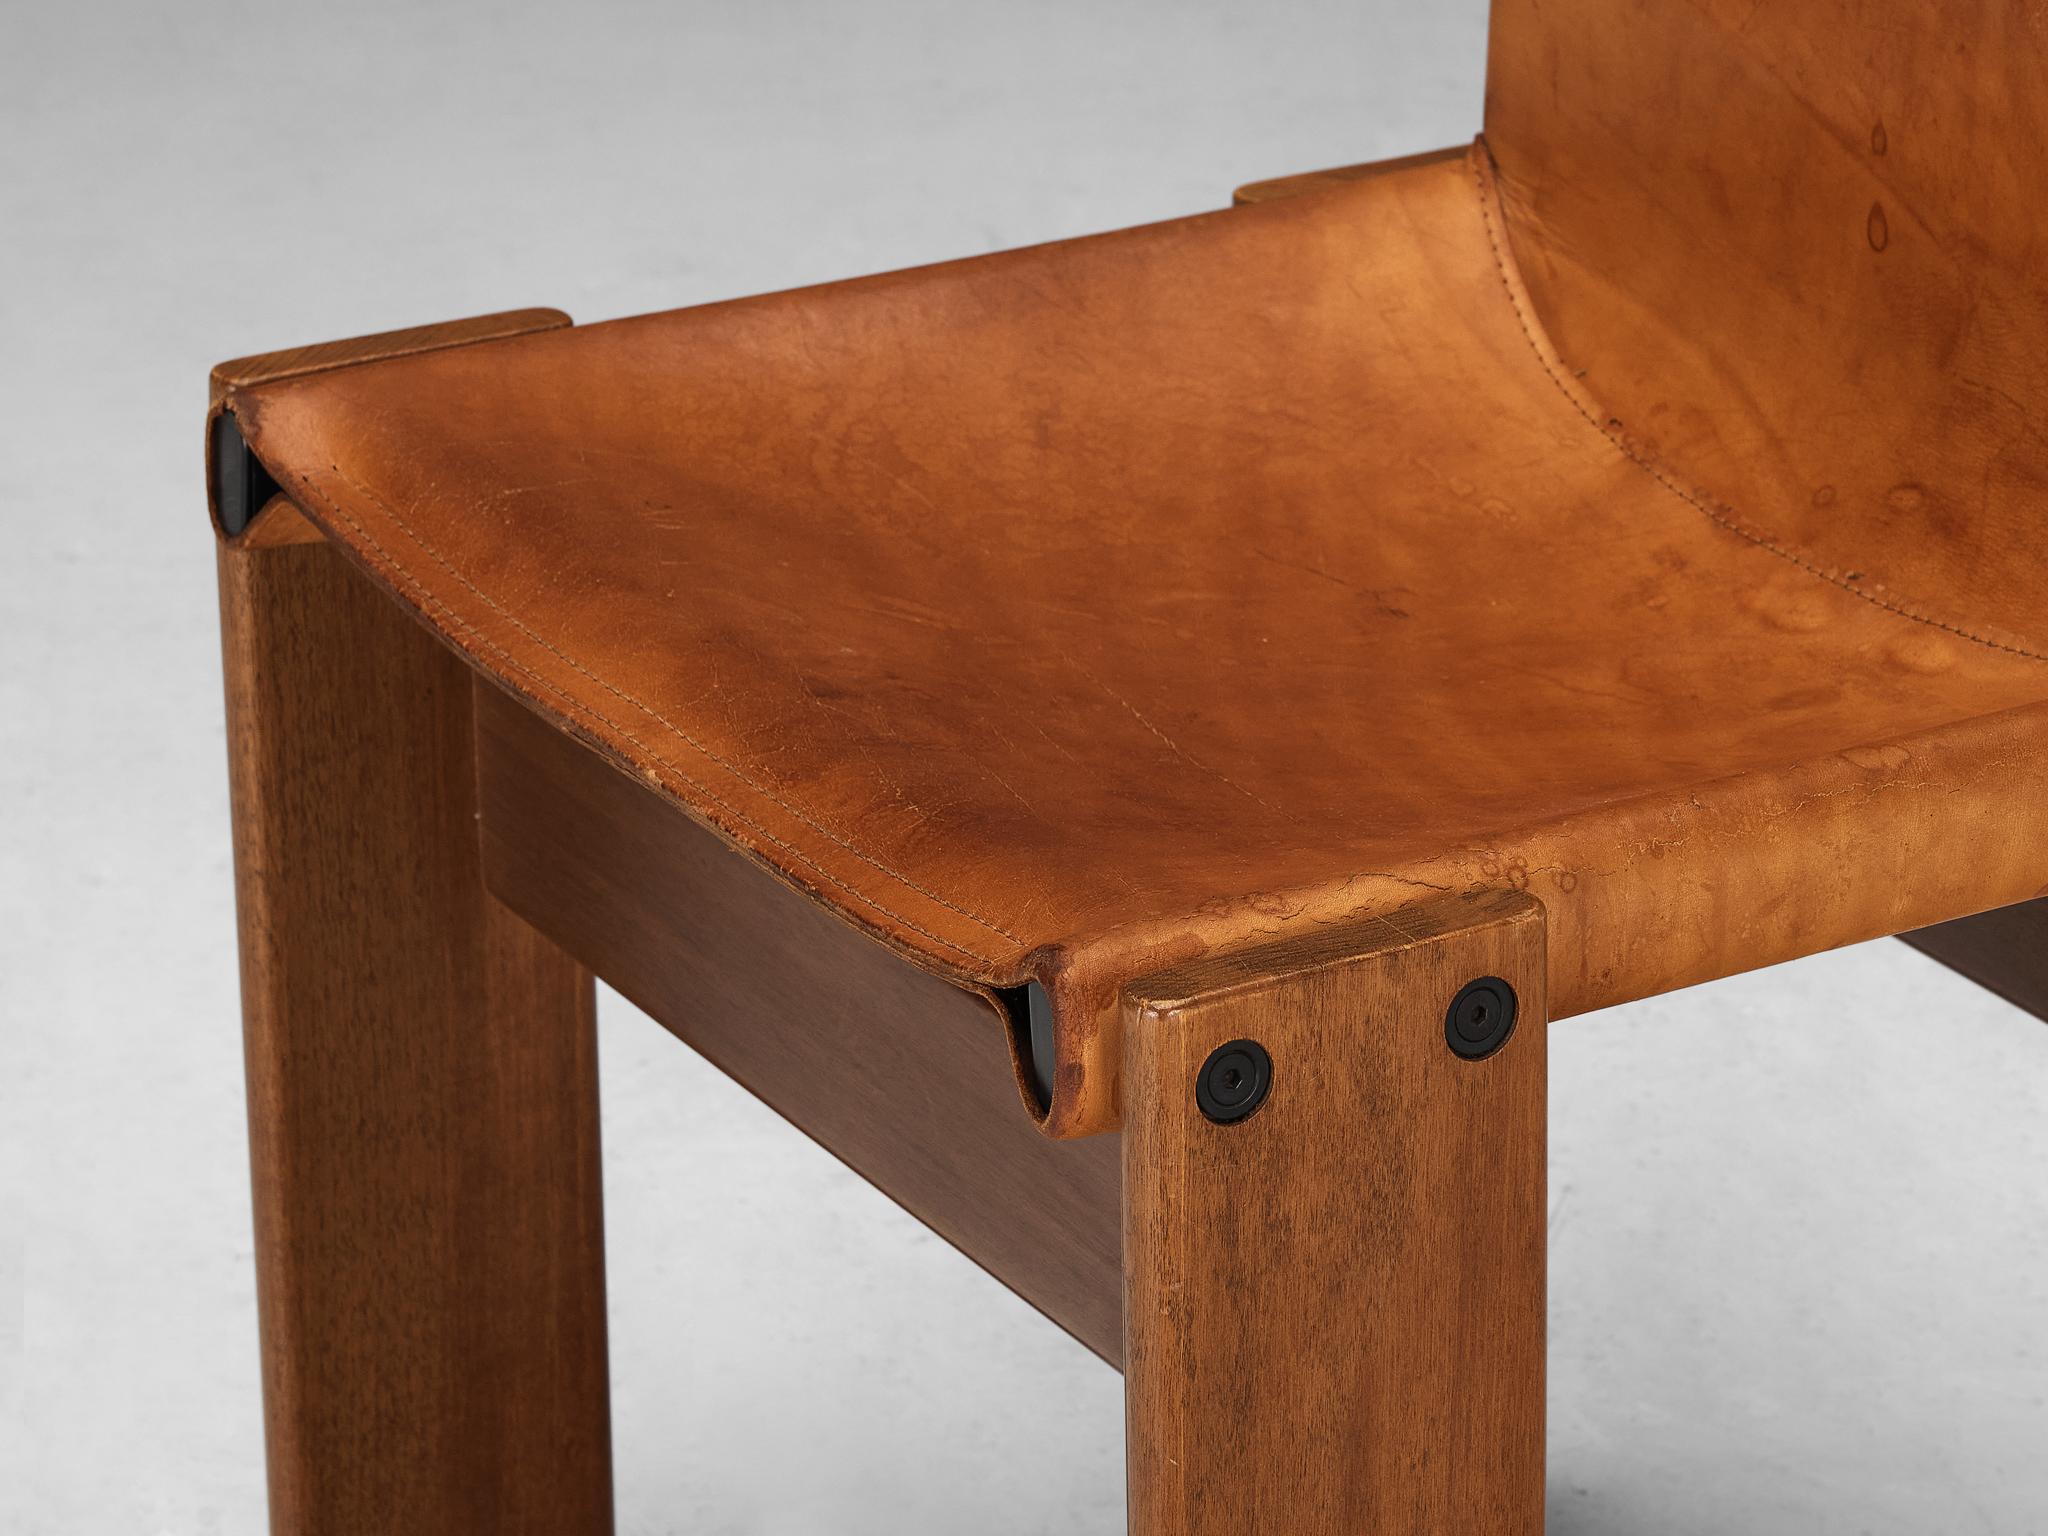 Tobia & Afra Scarpa for Molteni Set of Six 'Monk' Chairs in Leather